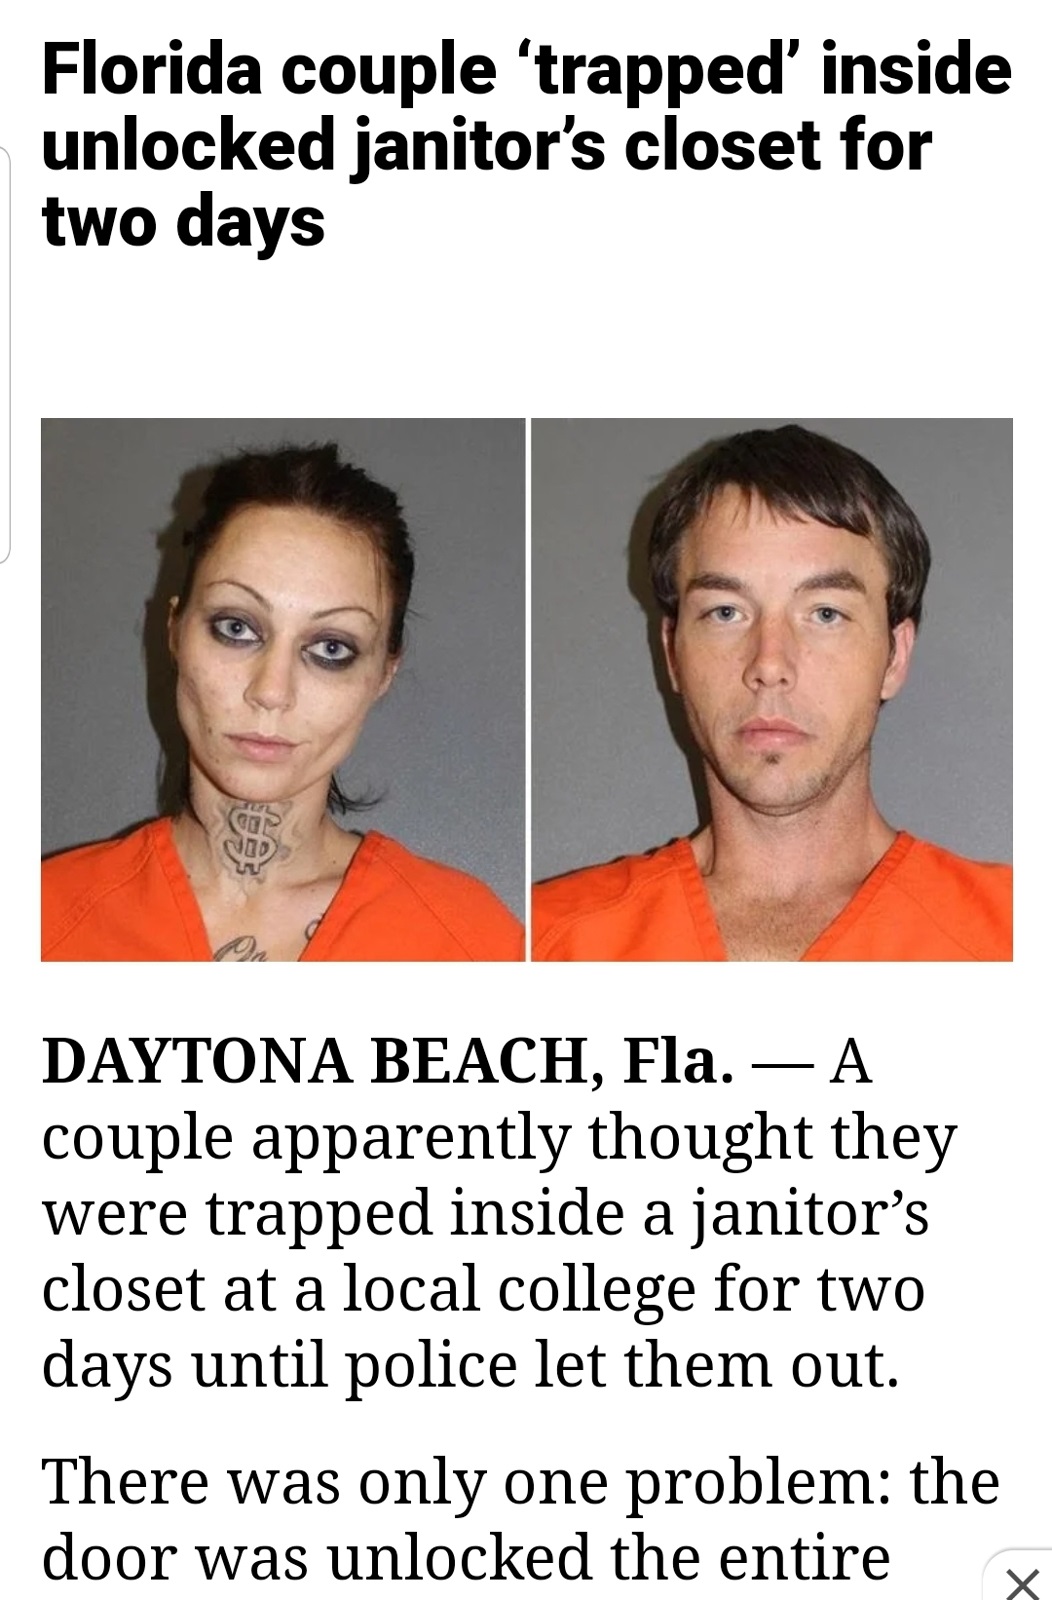 you hate someone everything they - Florida couple 'trapped inside unlocked janitor's closet for two days Jid Daytona Beach, Fla. A couple apparently thought they were trapped inside a janitor's closet at a local college for two days until police let them 